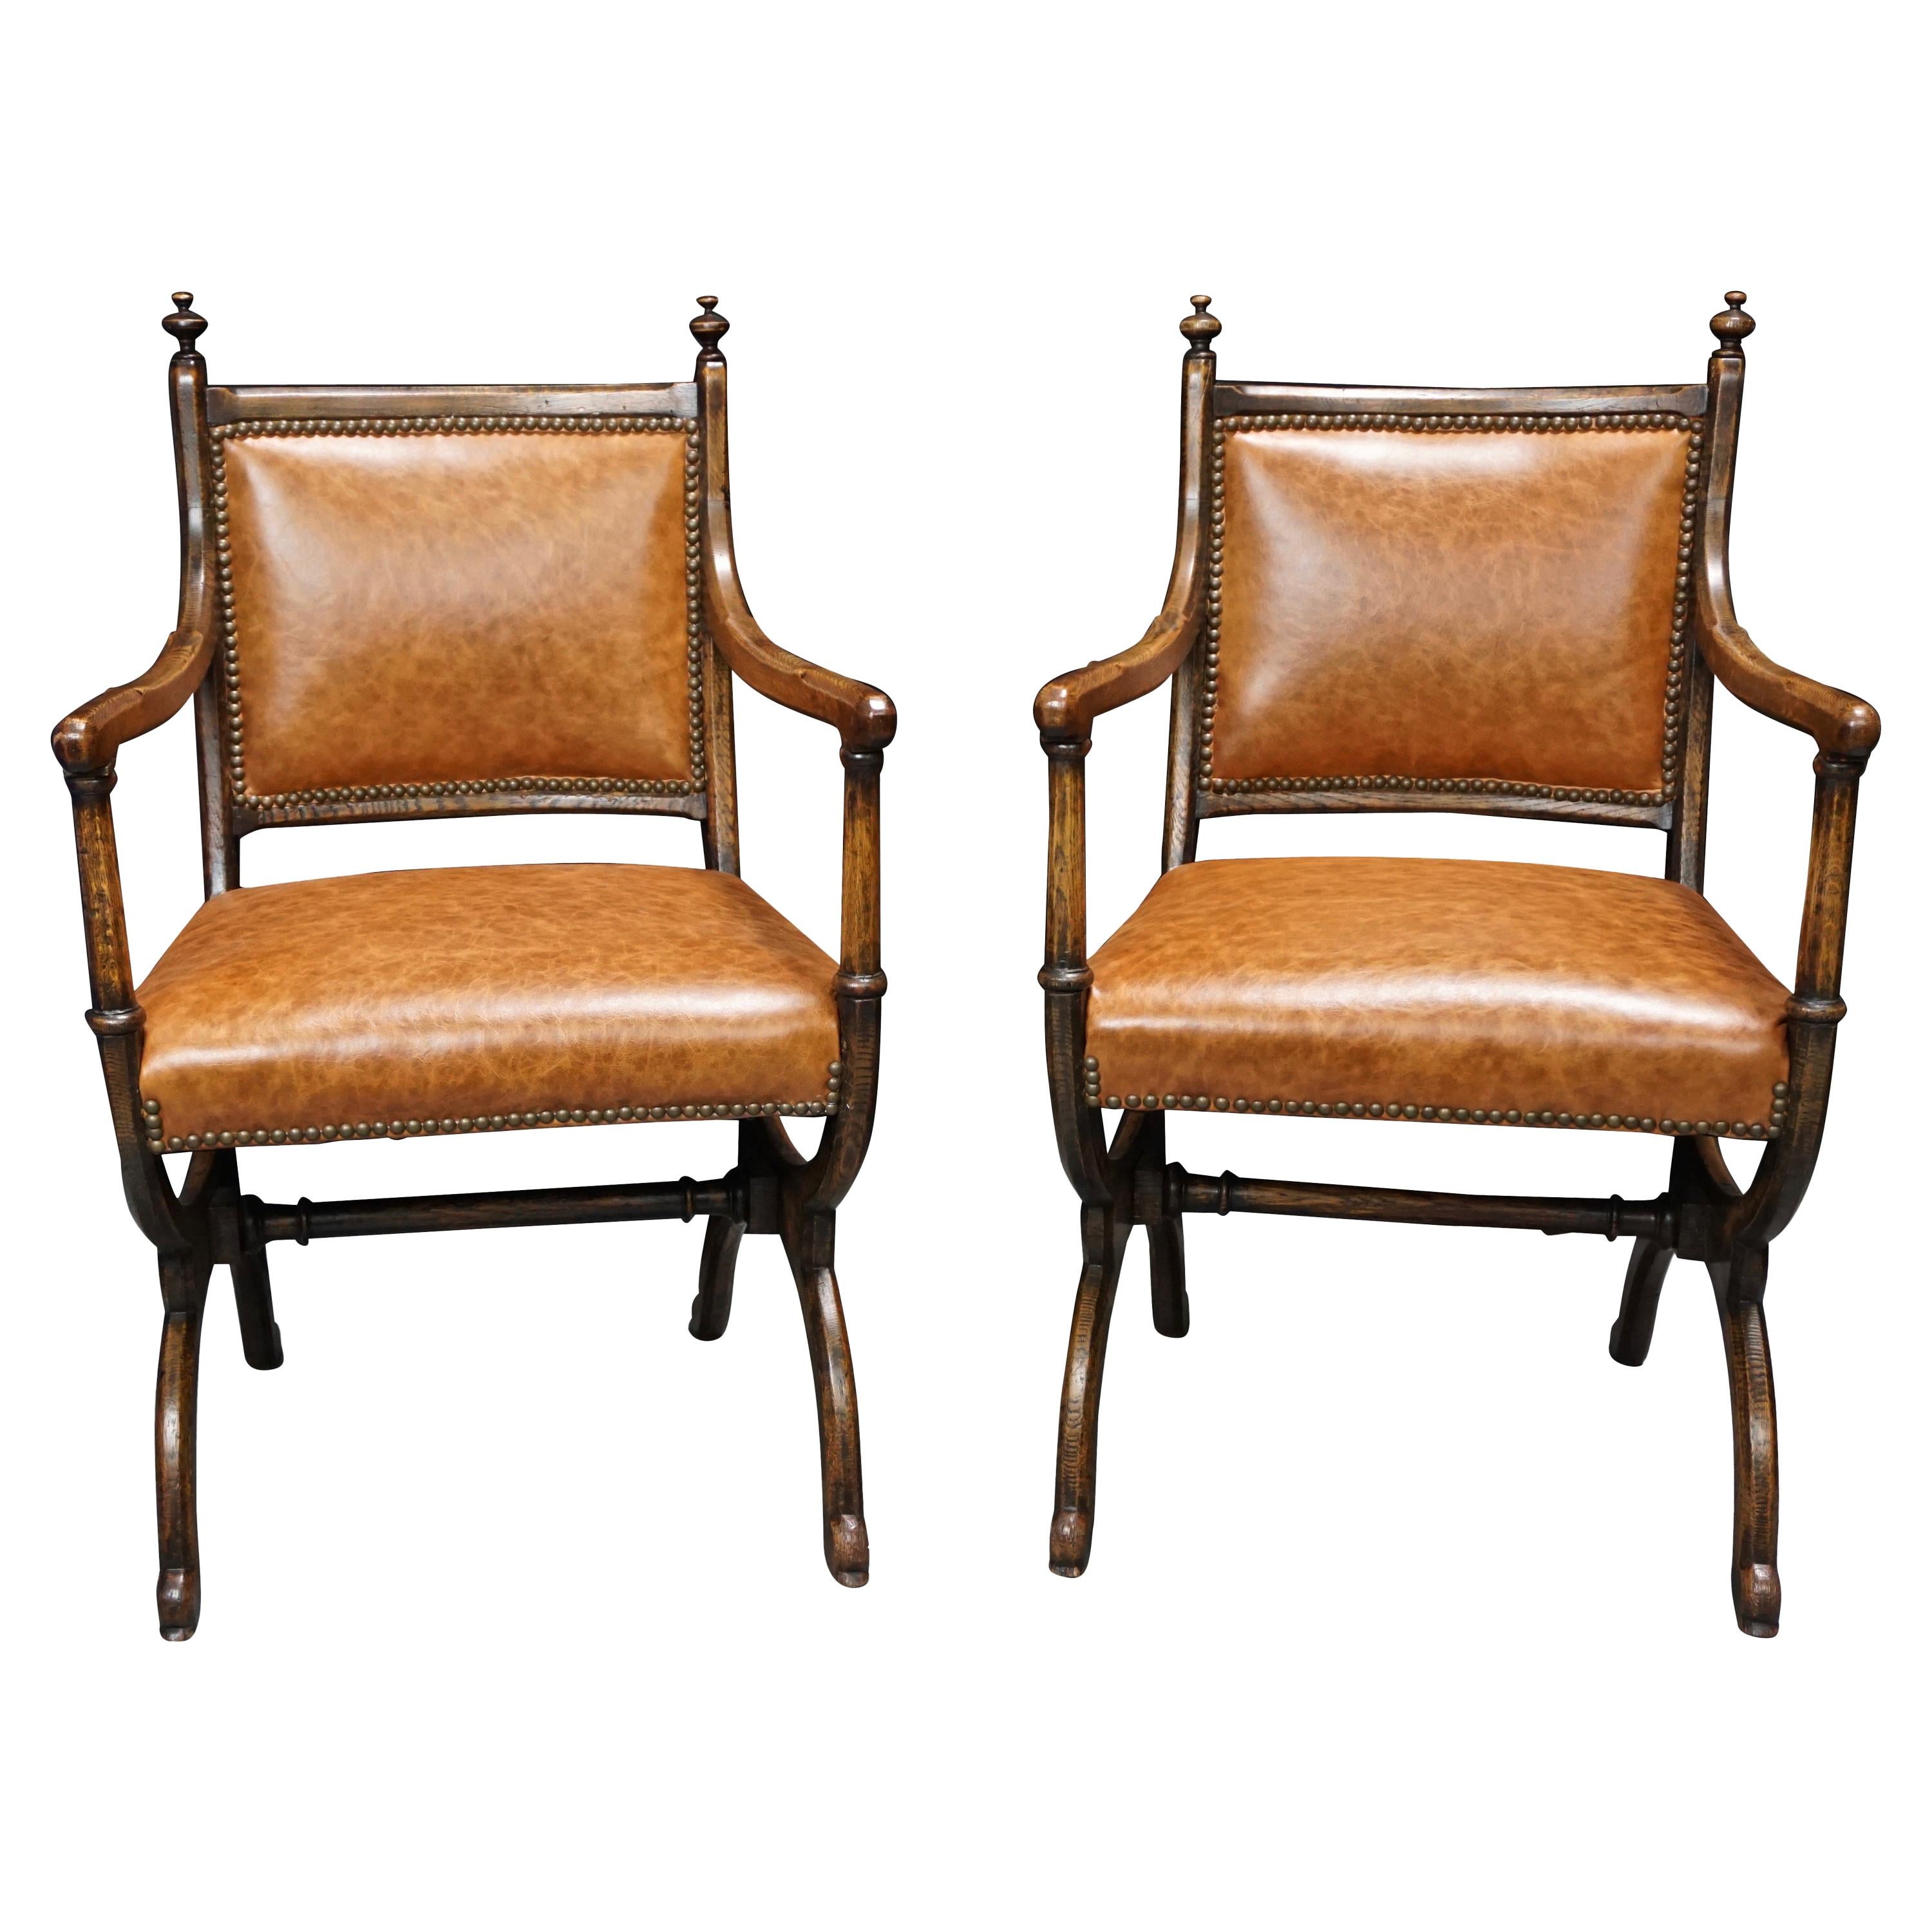 Pair of English Oak Gothic Revival Curule Armchairs after a Design by Pugin